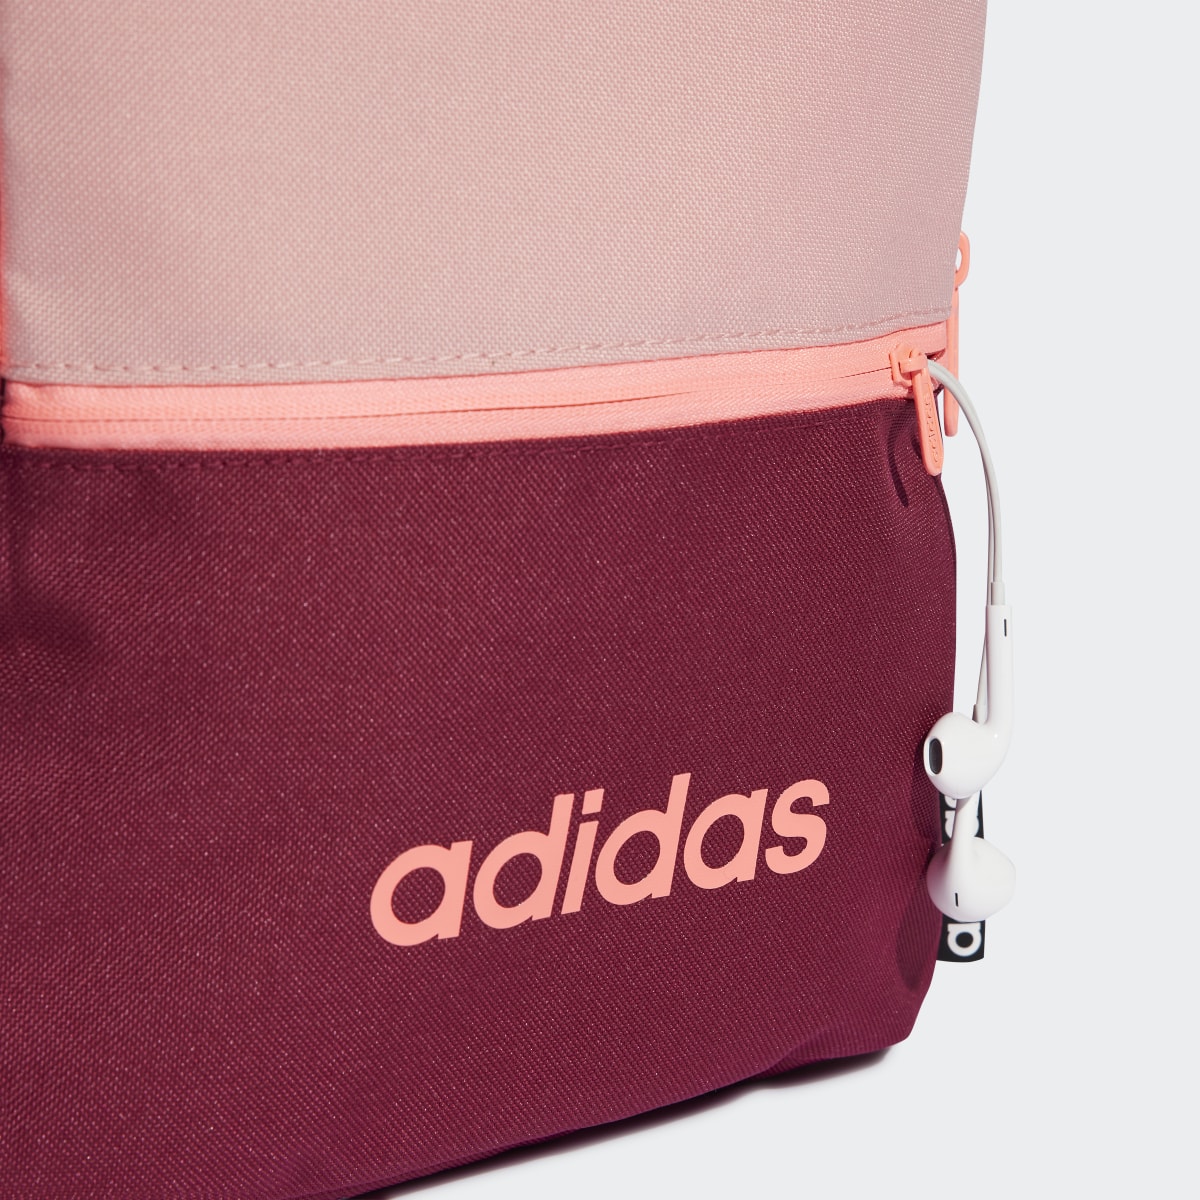 Adidas Classic Backpack. 6